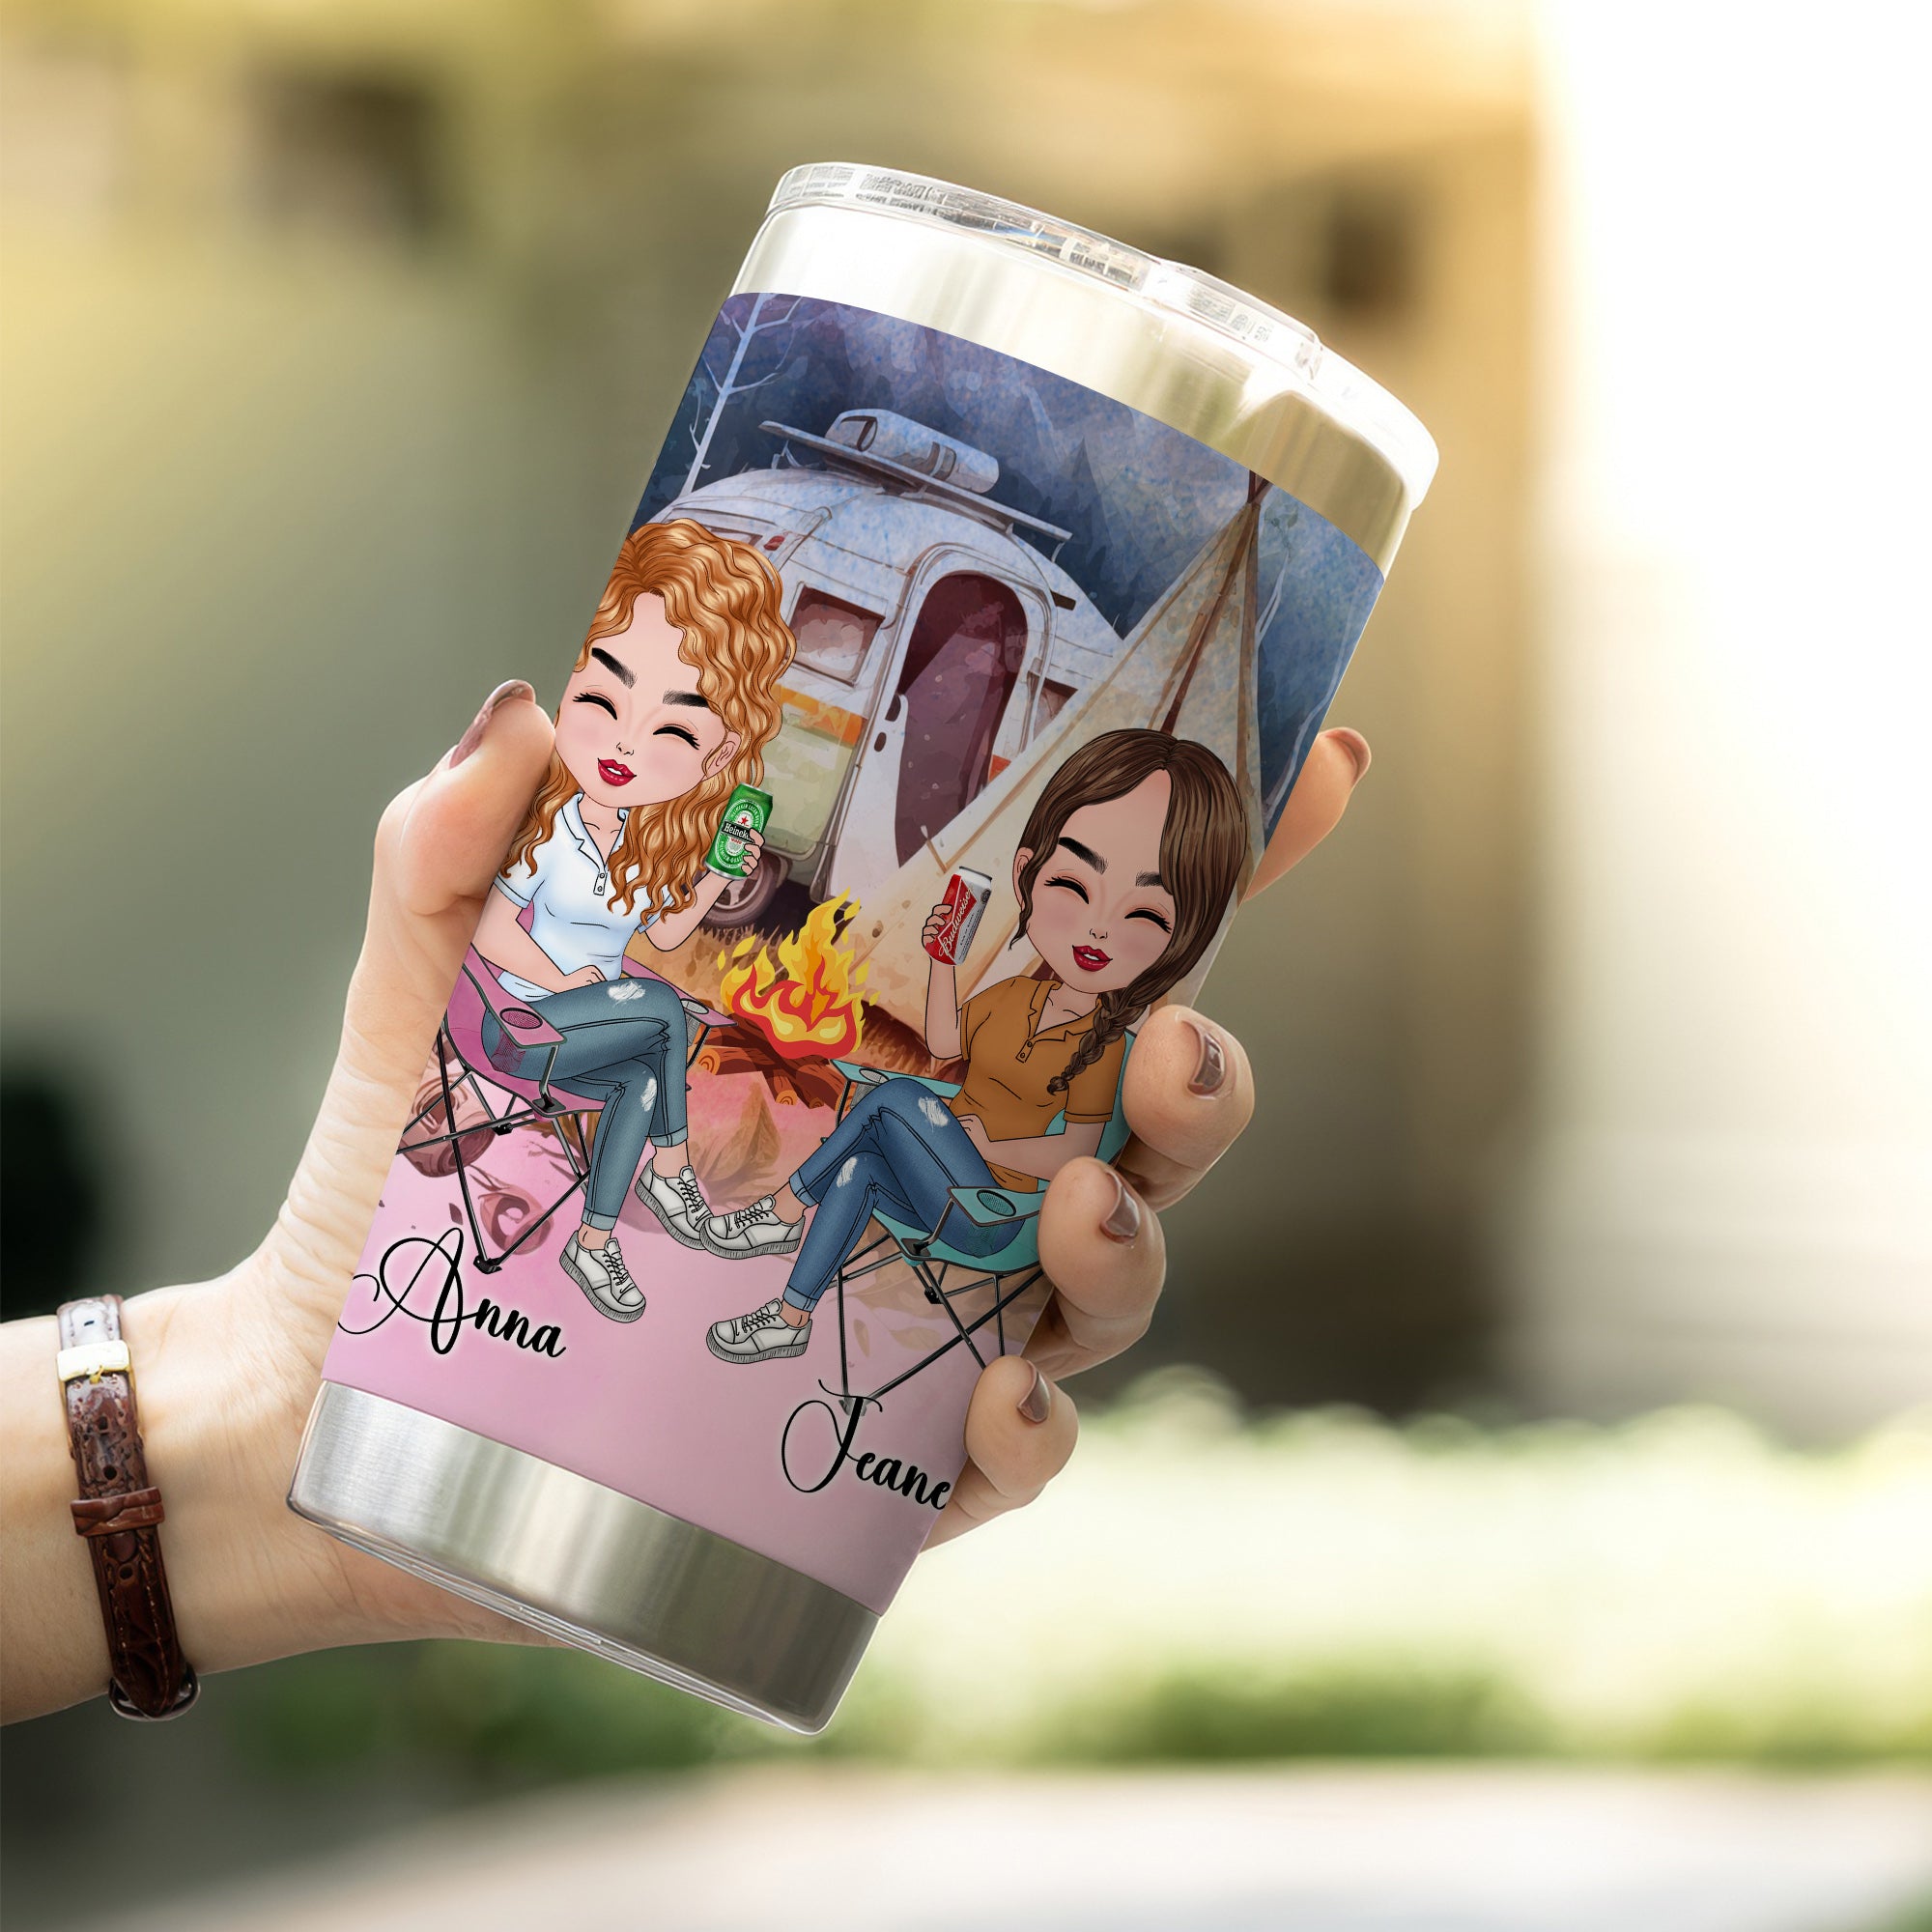 To My Bestie I Love You, Thank You To Standing By My Side, Personalized Camping Besties Tumbler, Gift For Best Friend